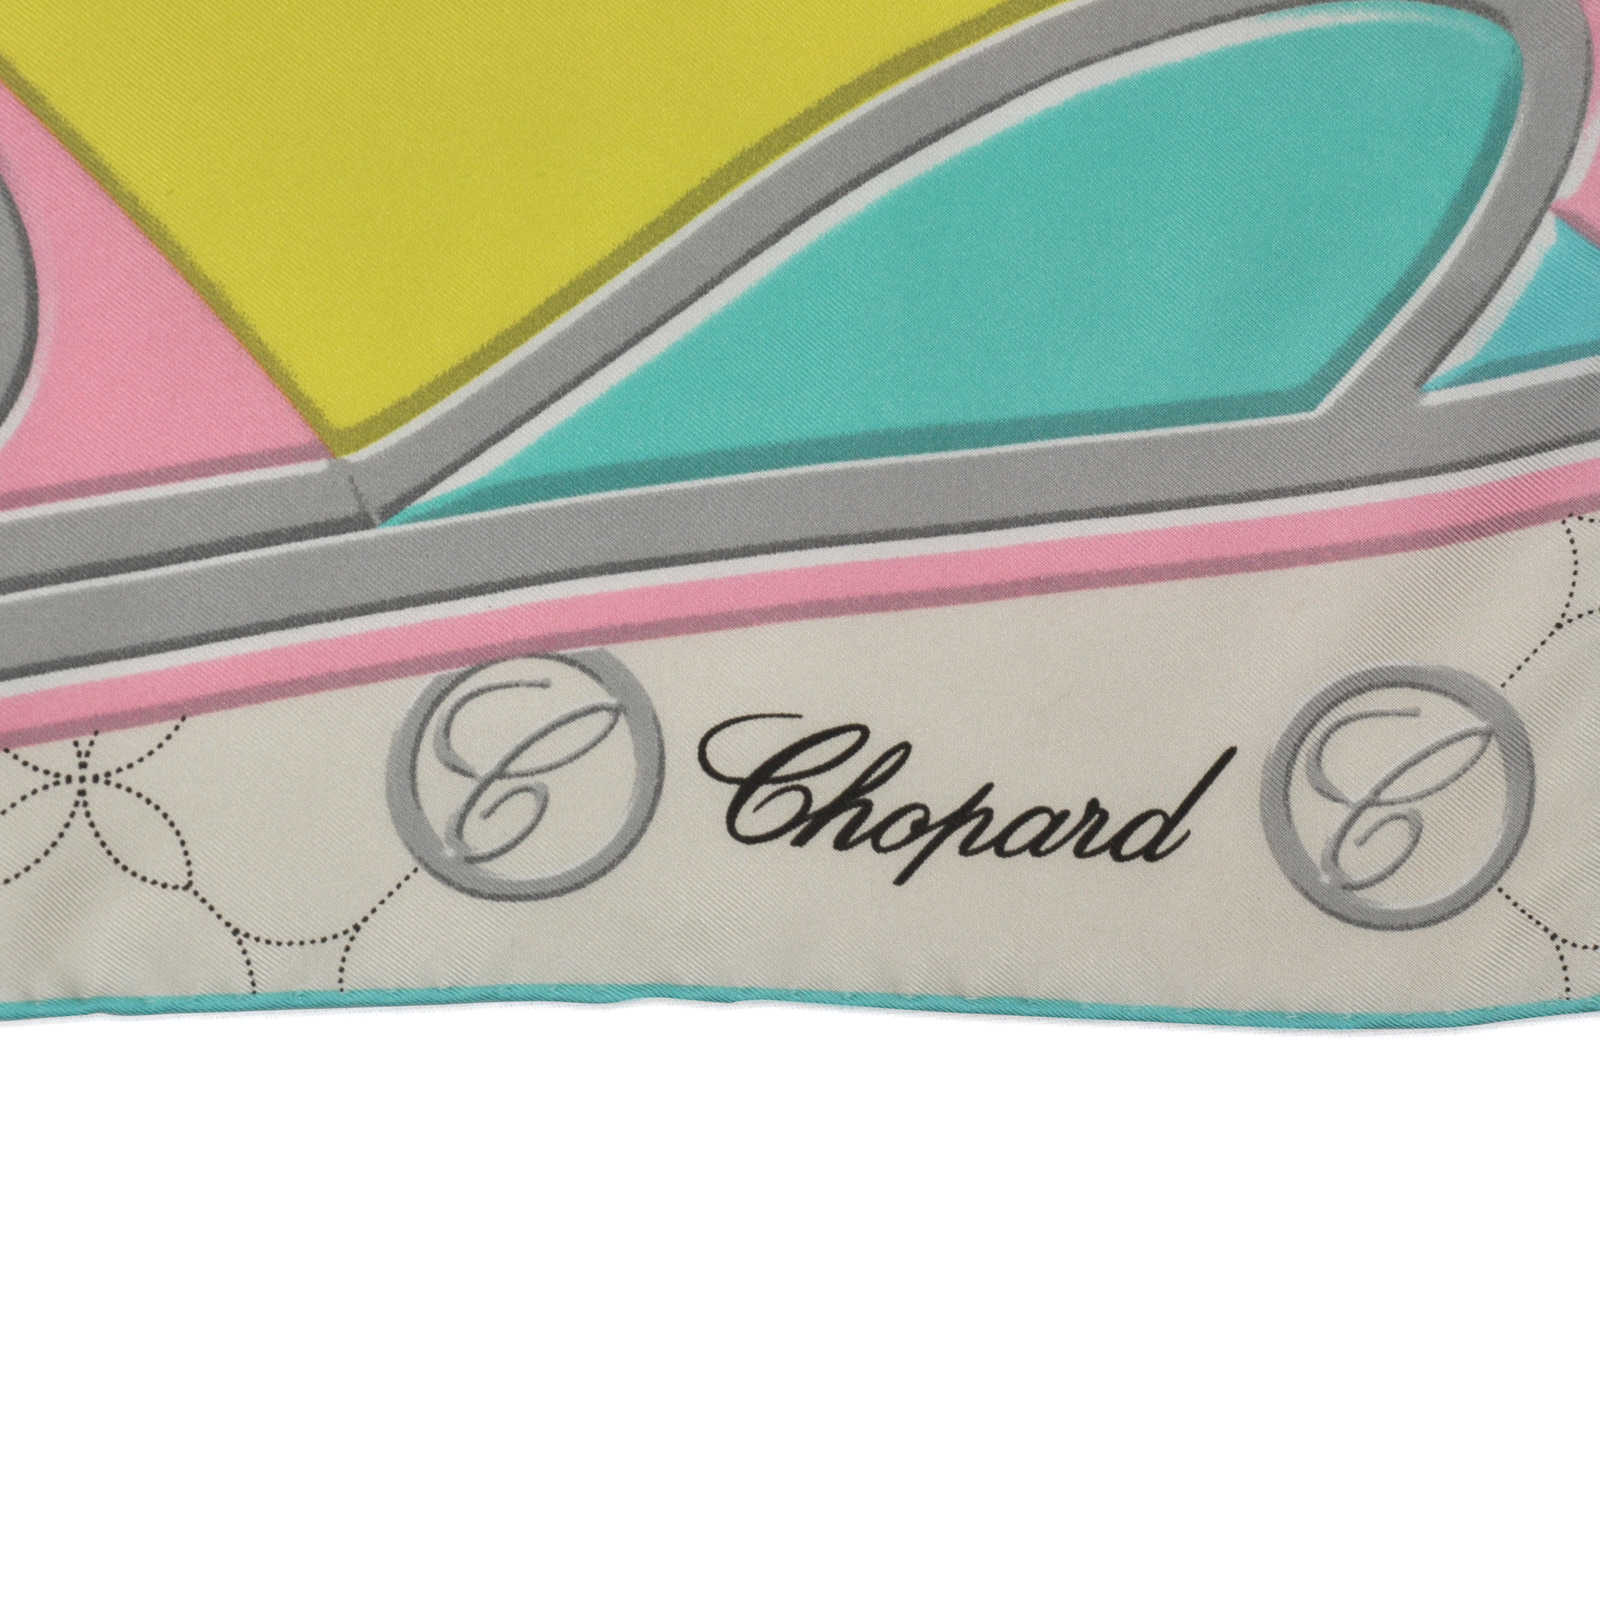 Chopard Logo - Authentic Pre Owned Chopard Logo Detail Scarf (PSS 265 00022). THE